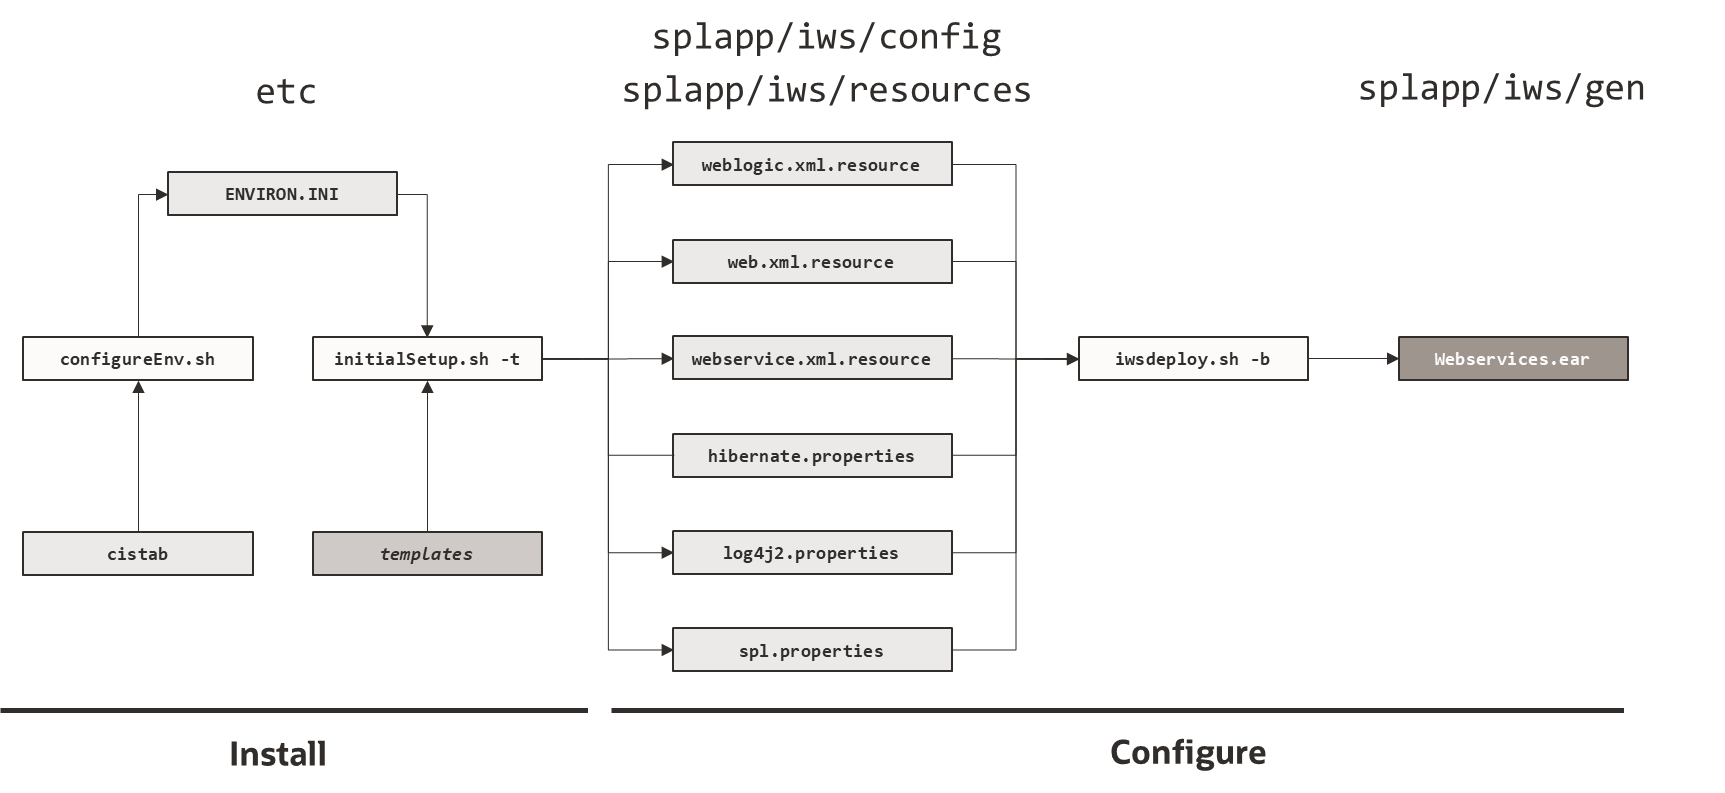 Figure that shows the structure of the Inbound Web Services Configuration Process.